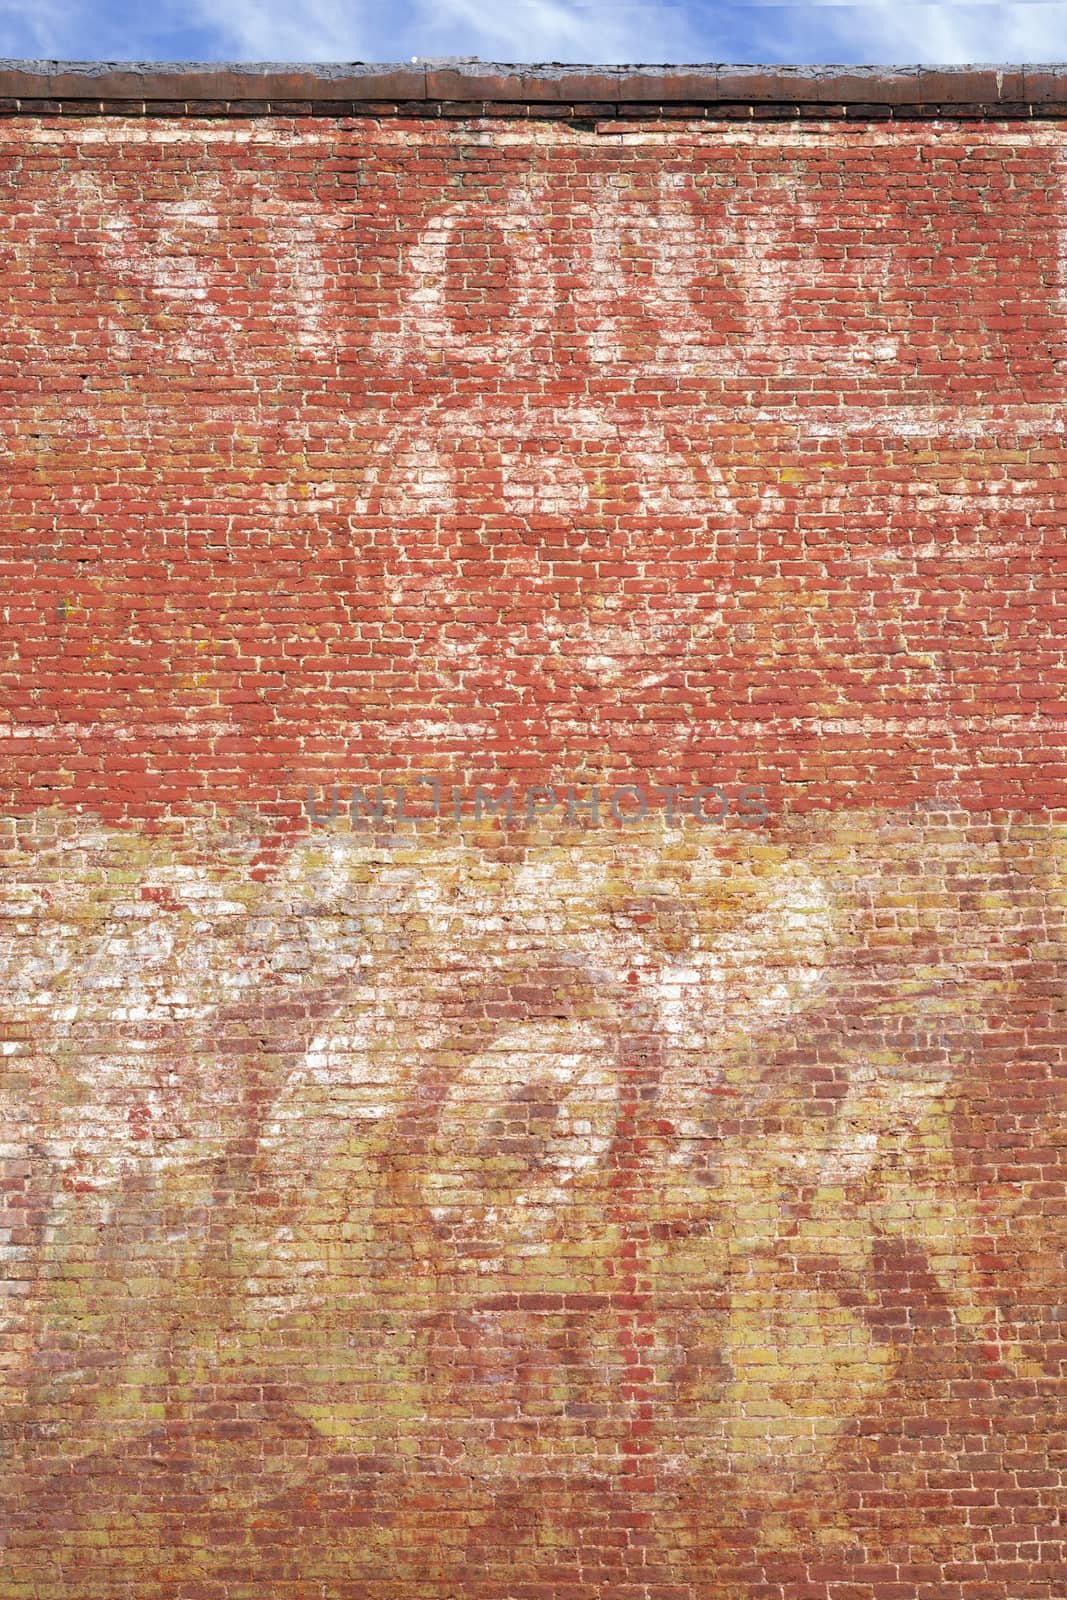 Faded Wall Signs by CharlieFloyd